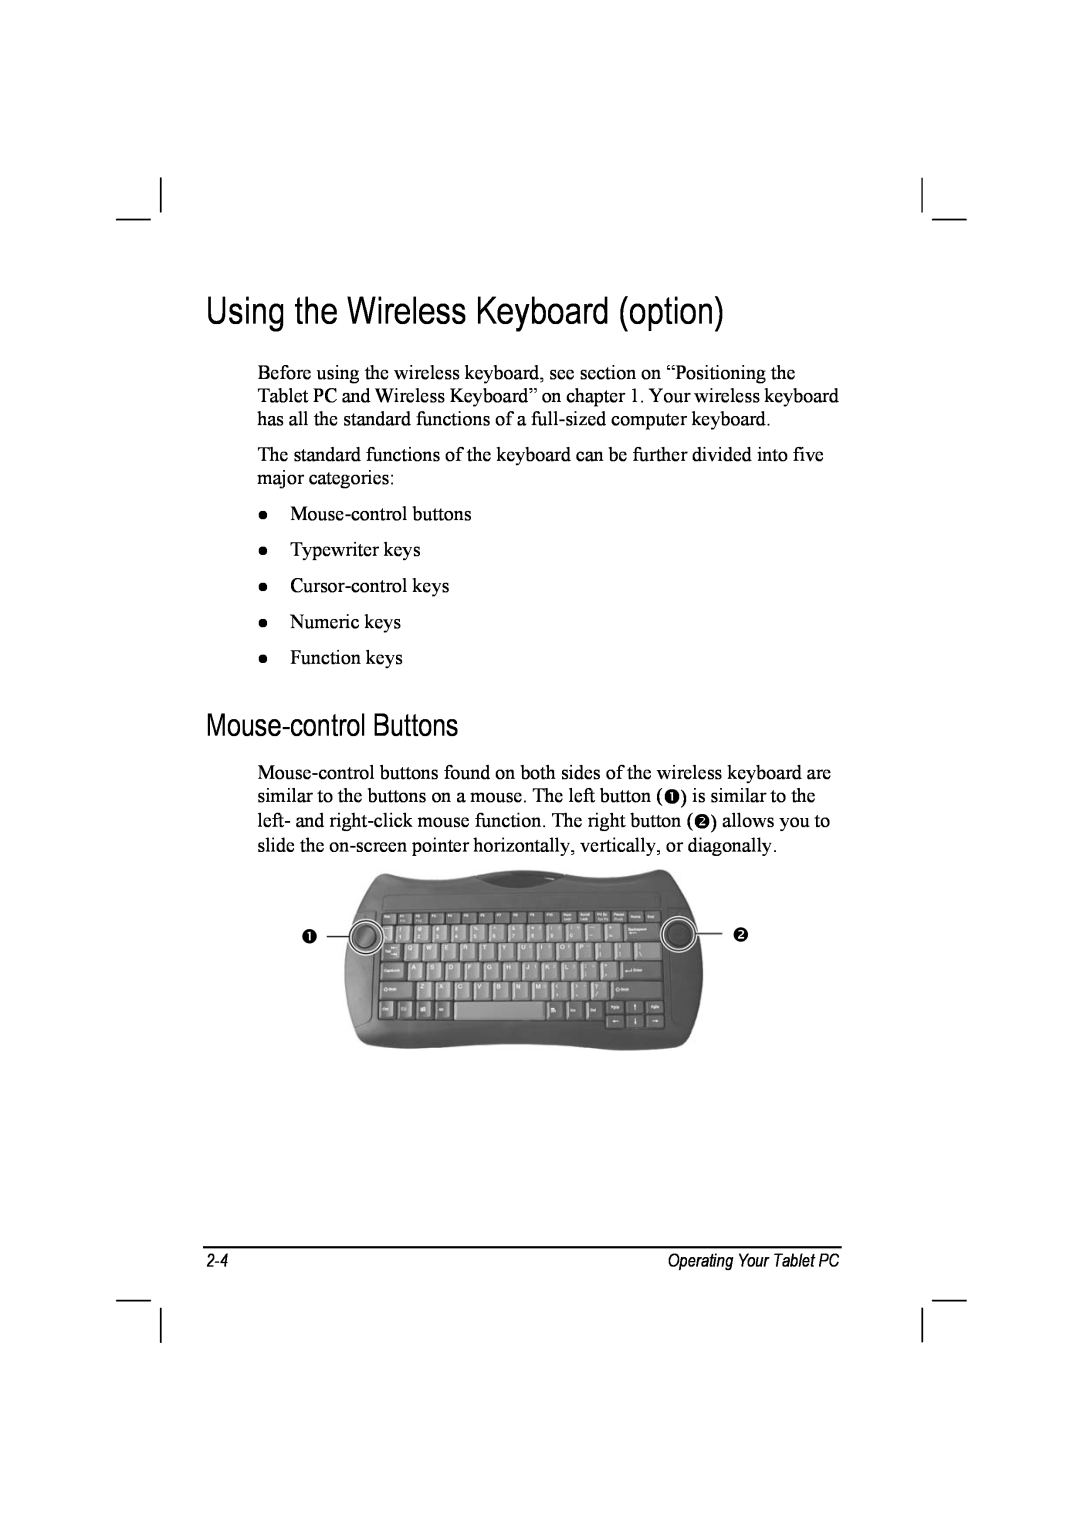 TAG 10 manual Using the Wireless Keyboard option, Mouse-control Buttons 